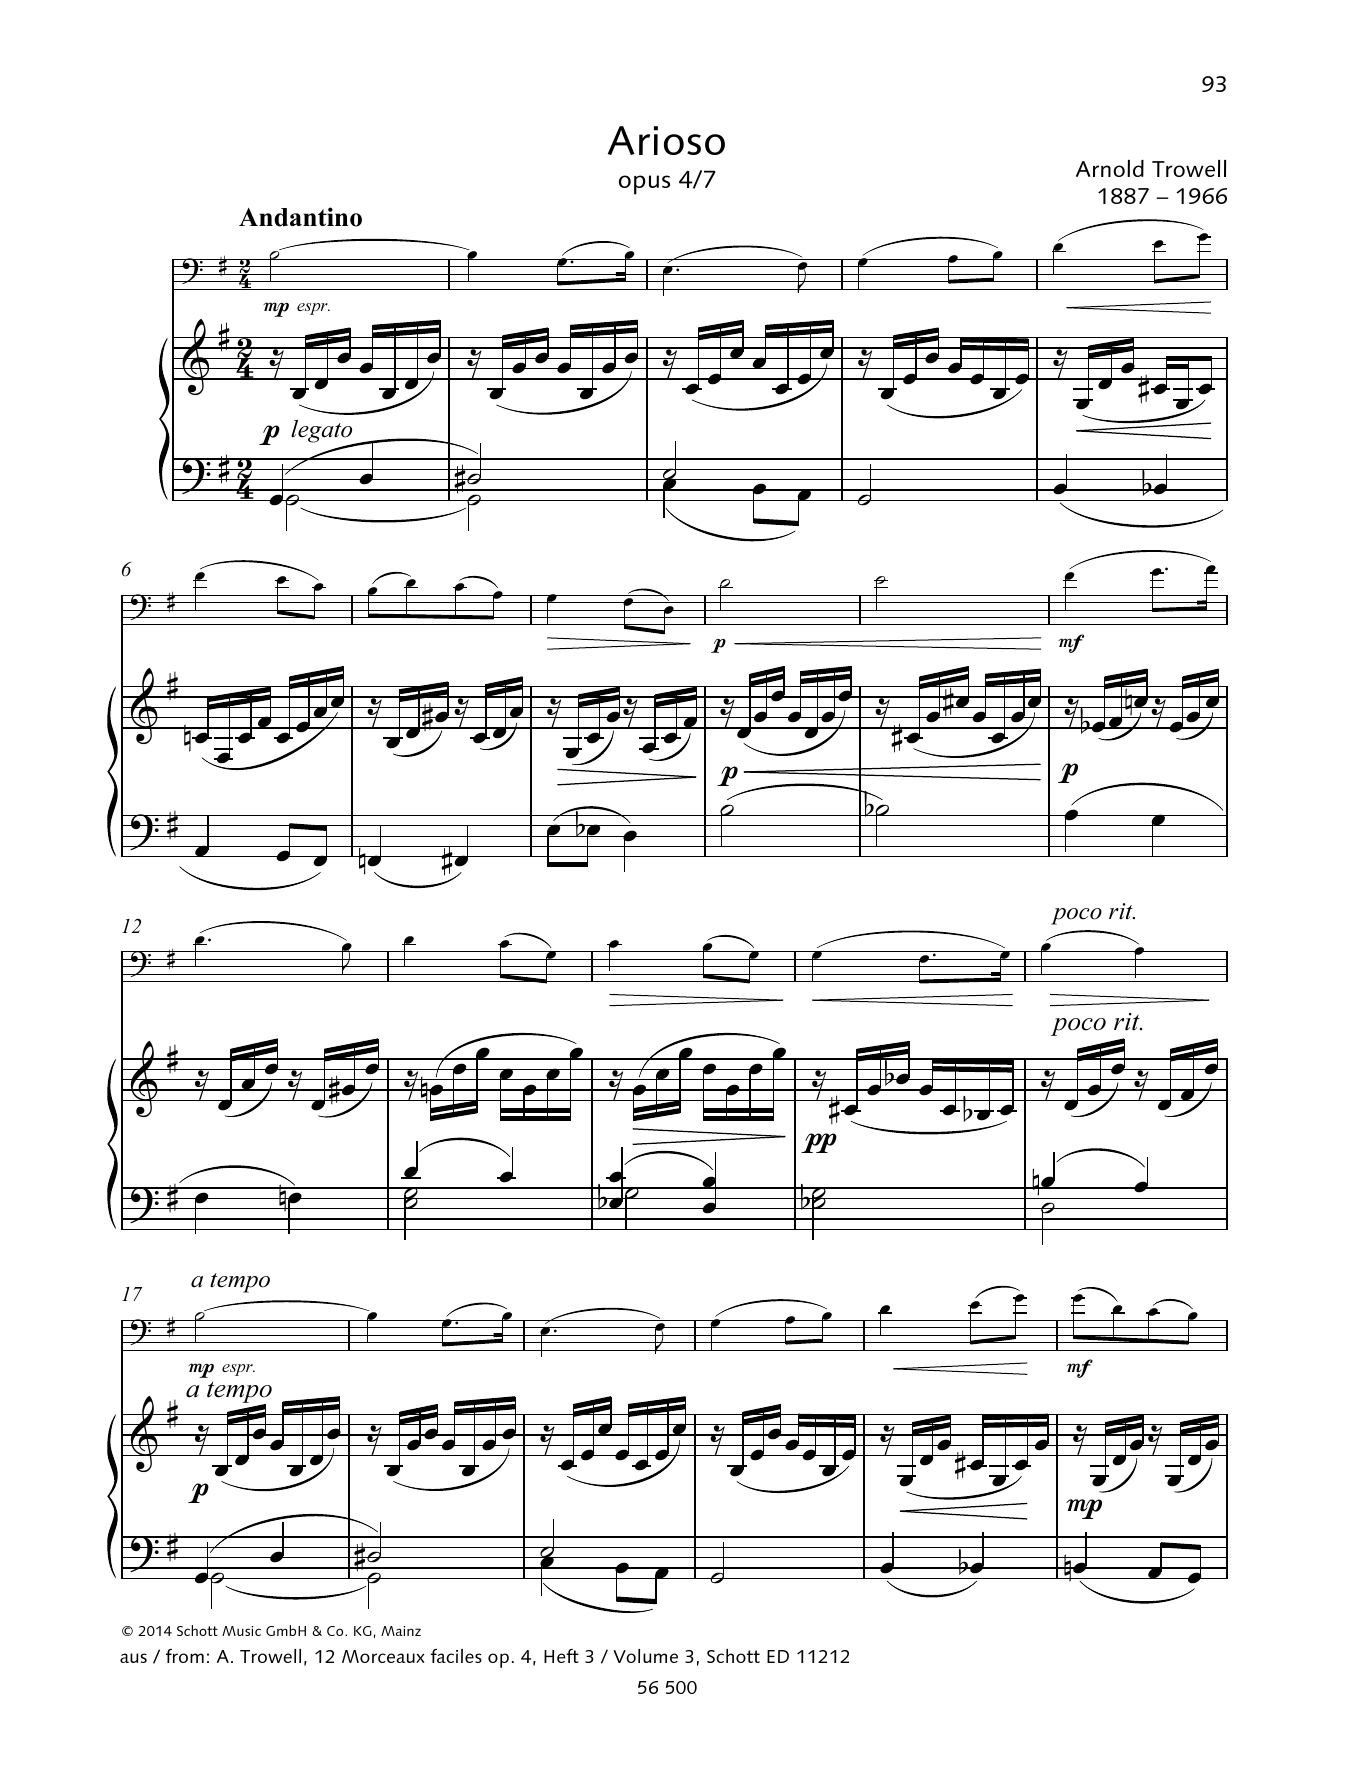 Arnold Trowell Arioso sheet music notes and chords. Download Printable PDF.